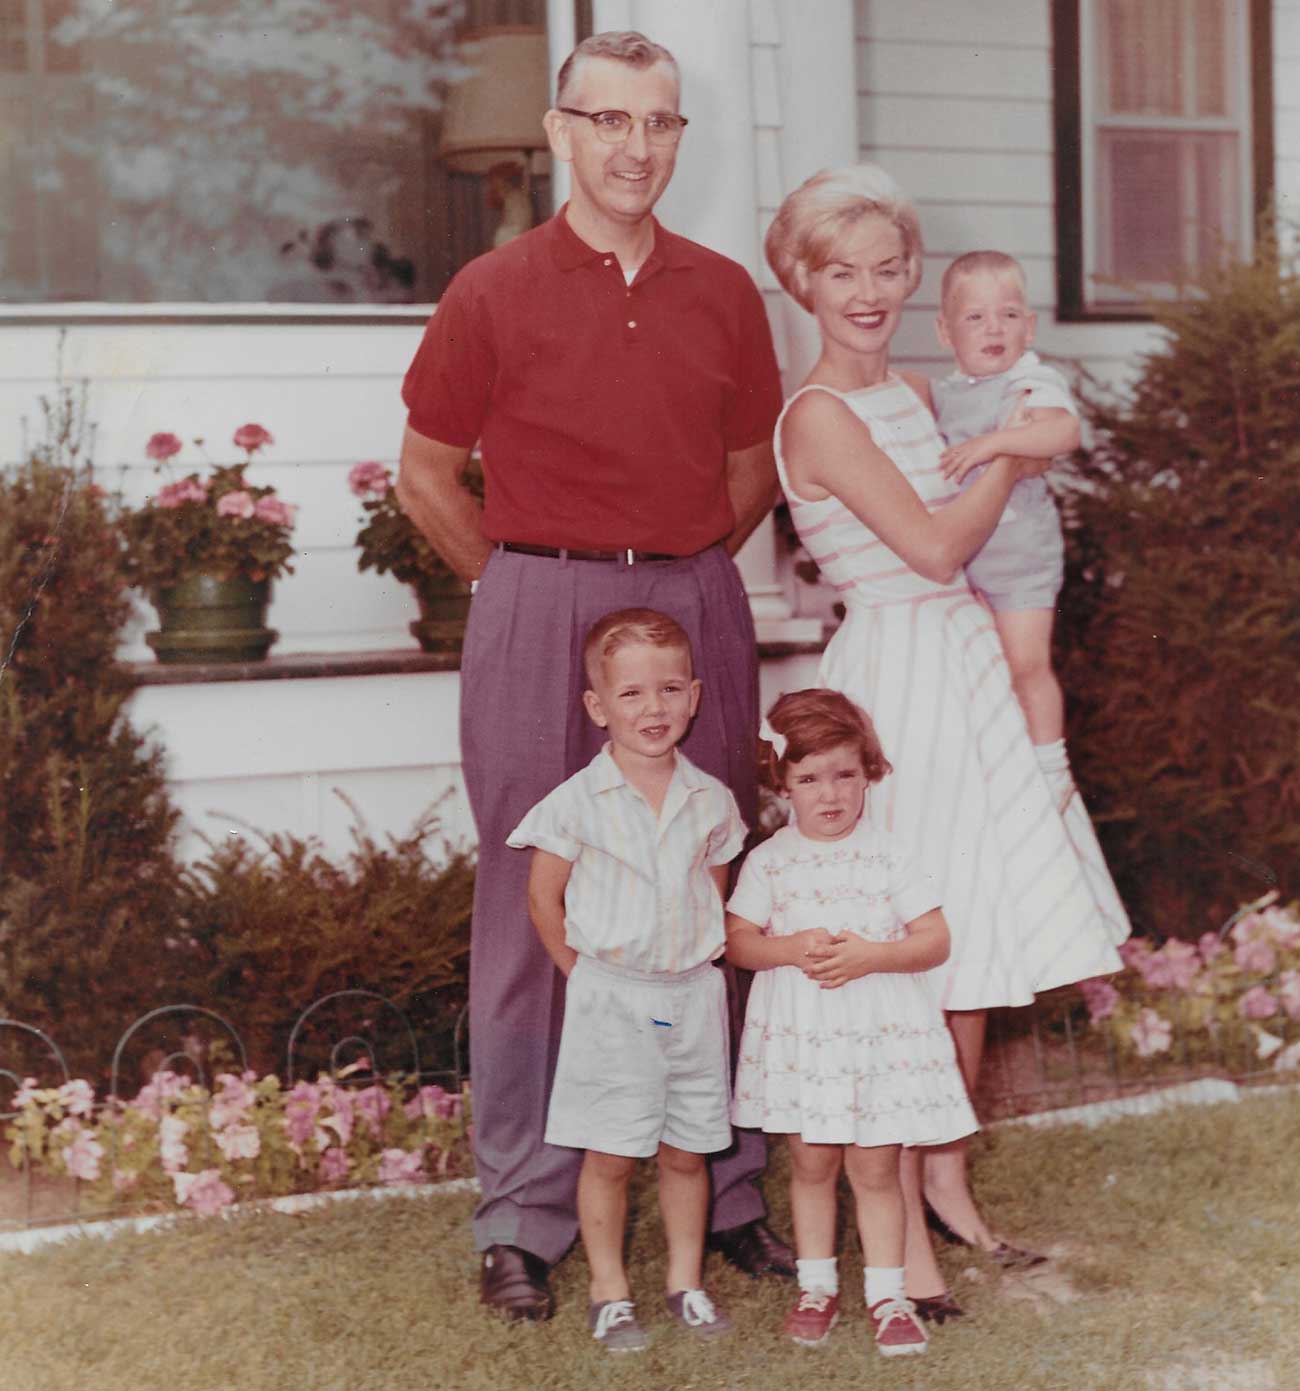 The Bernet family at their home in Shaker Heights: Morrie, his wife Helen, and (from left) Mitch, Lisa and John. (Jim came a few years later.)
